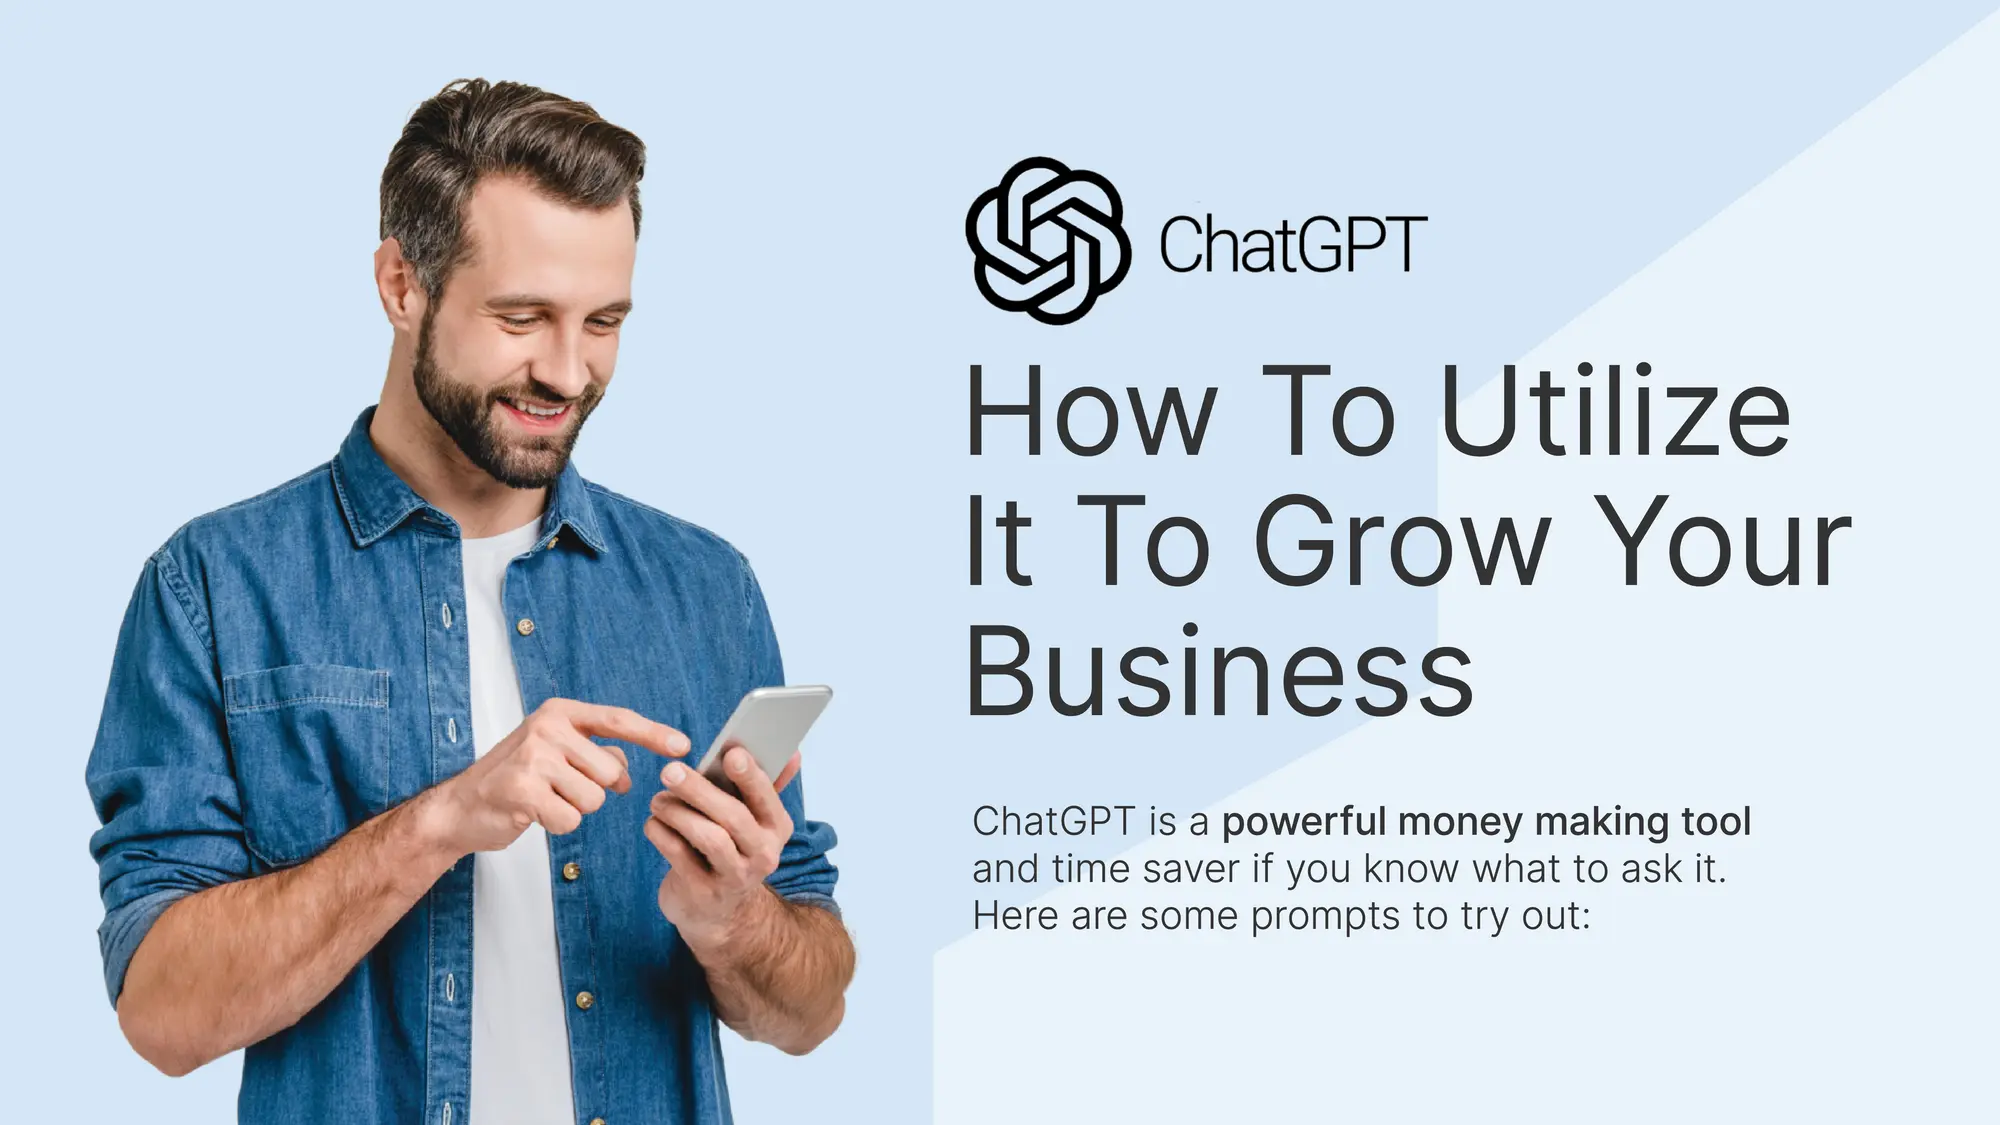 How To Get ChatGPT To Grow Your Business